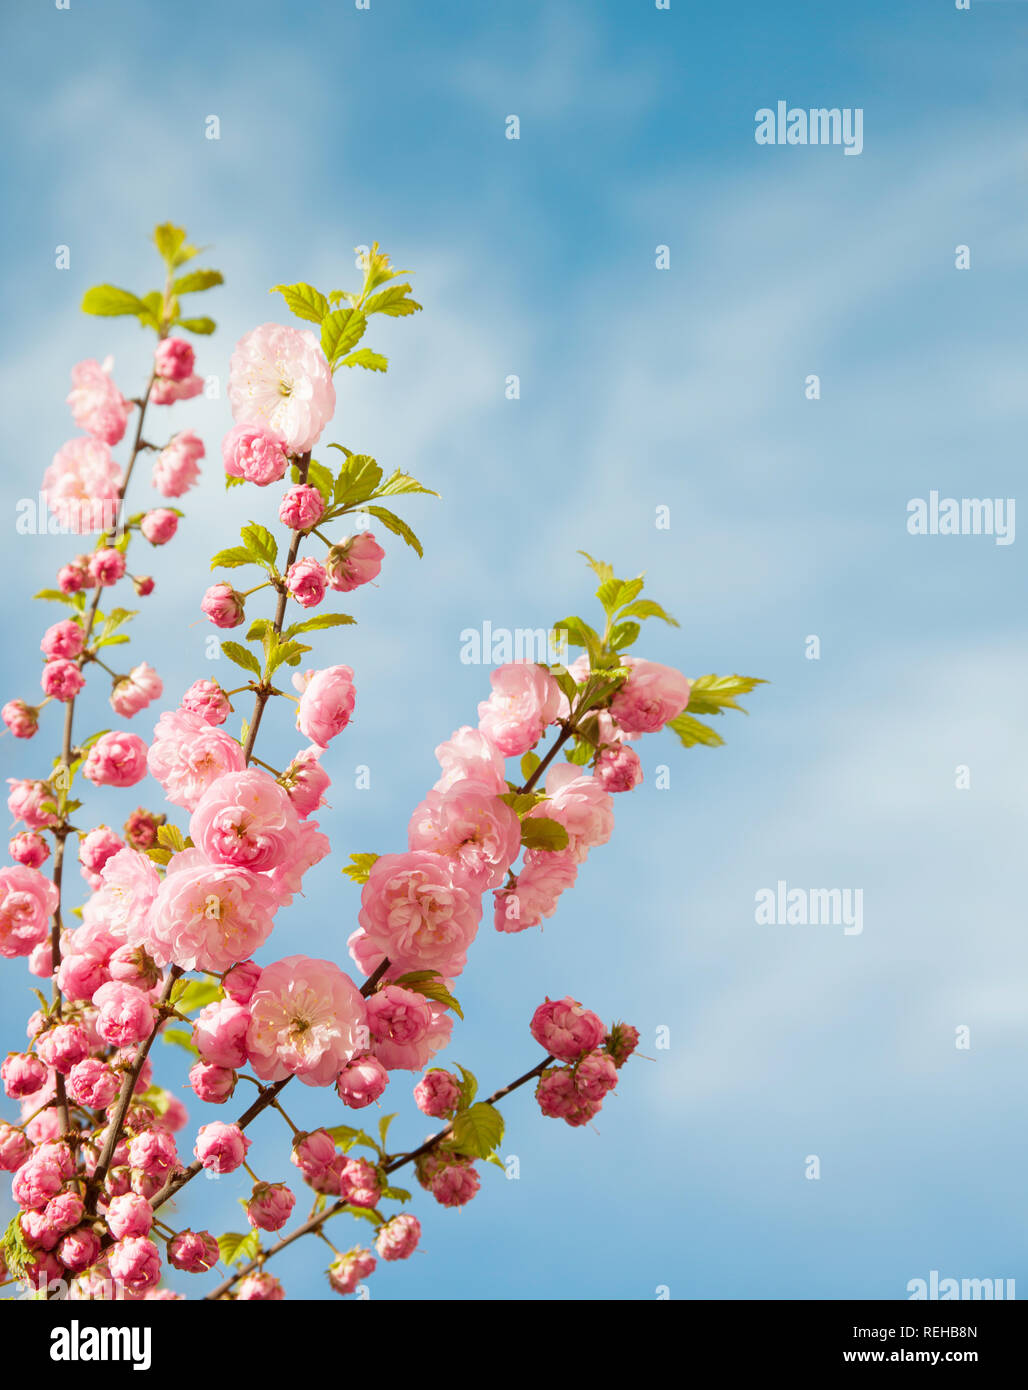 branches with beautiful pink flowers against the blue sky. . Amygdalus triloba Stock Photo